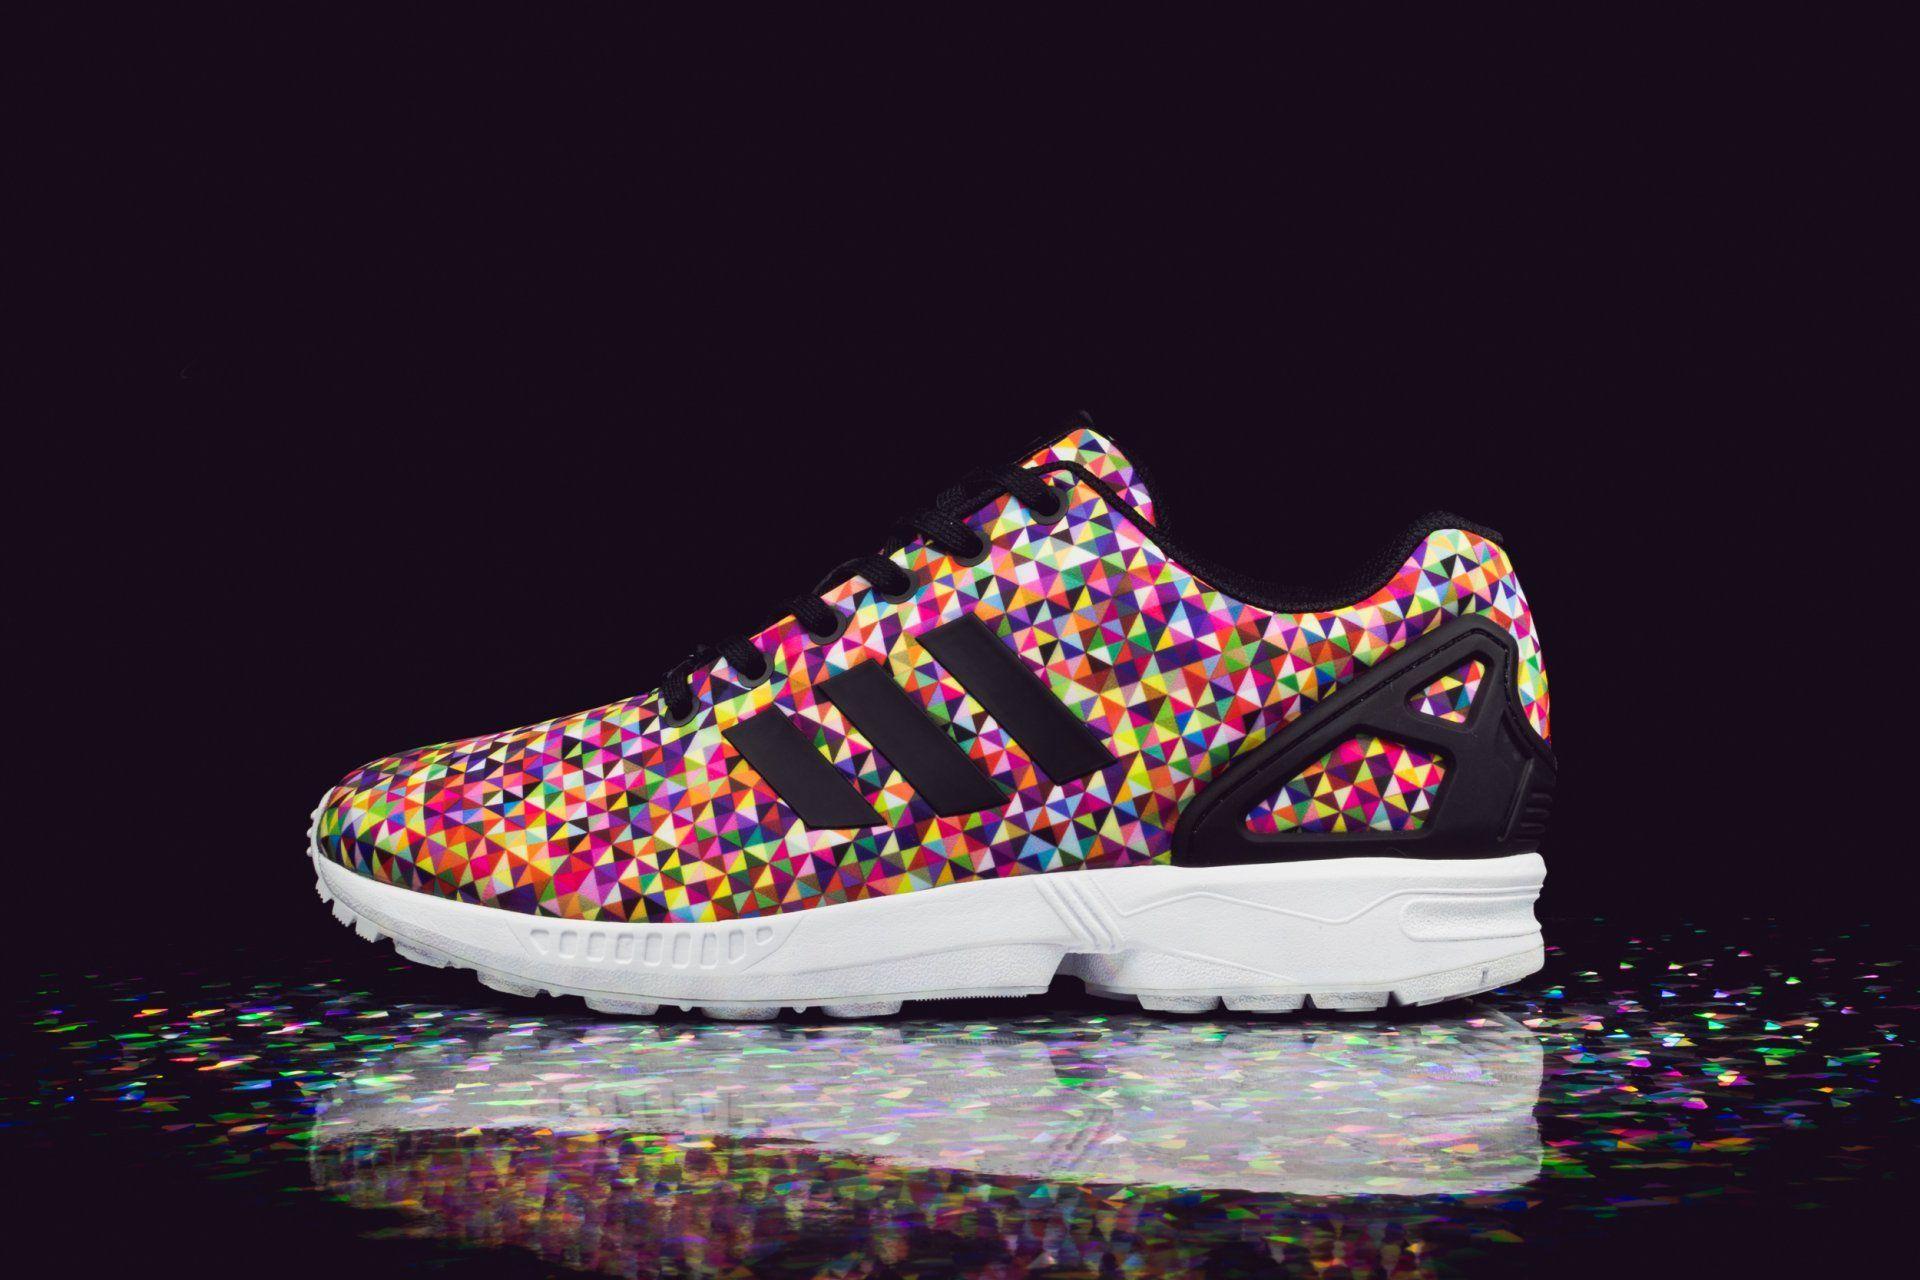 Adidas Shoes Wallpaper High Quality Widescreen Zx Flux Multi Color